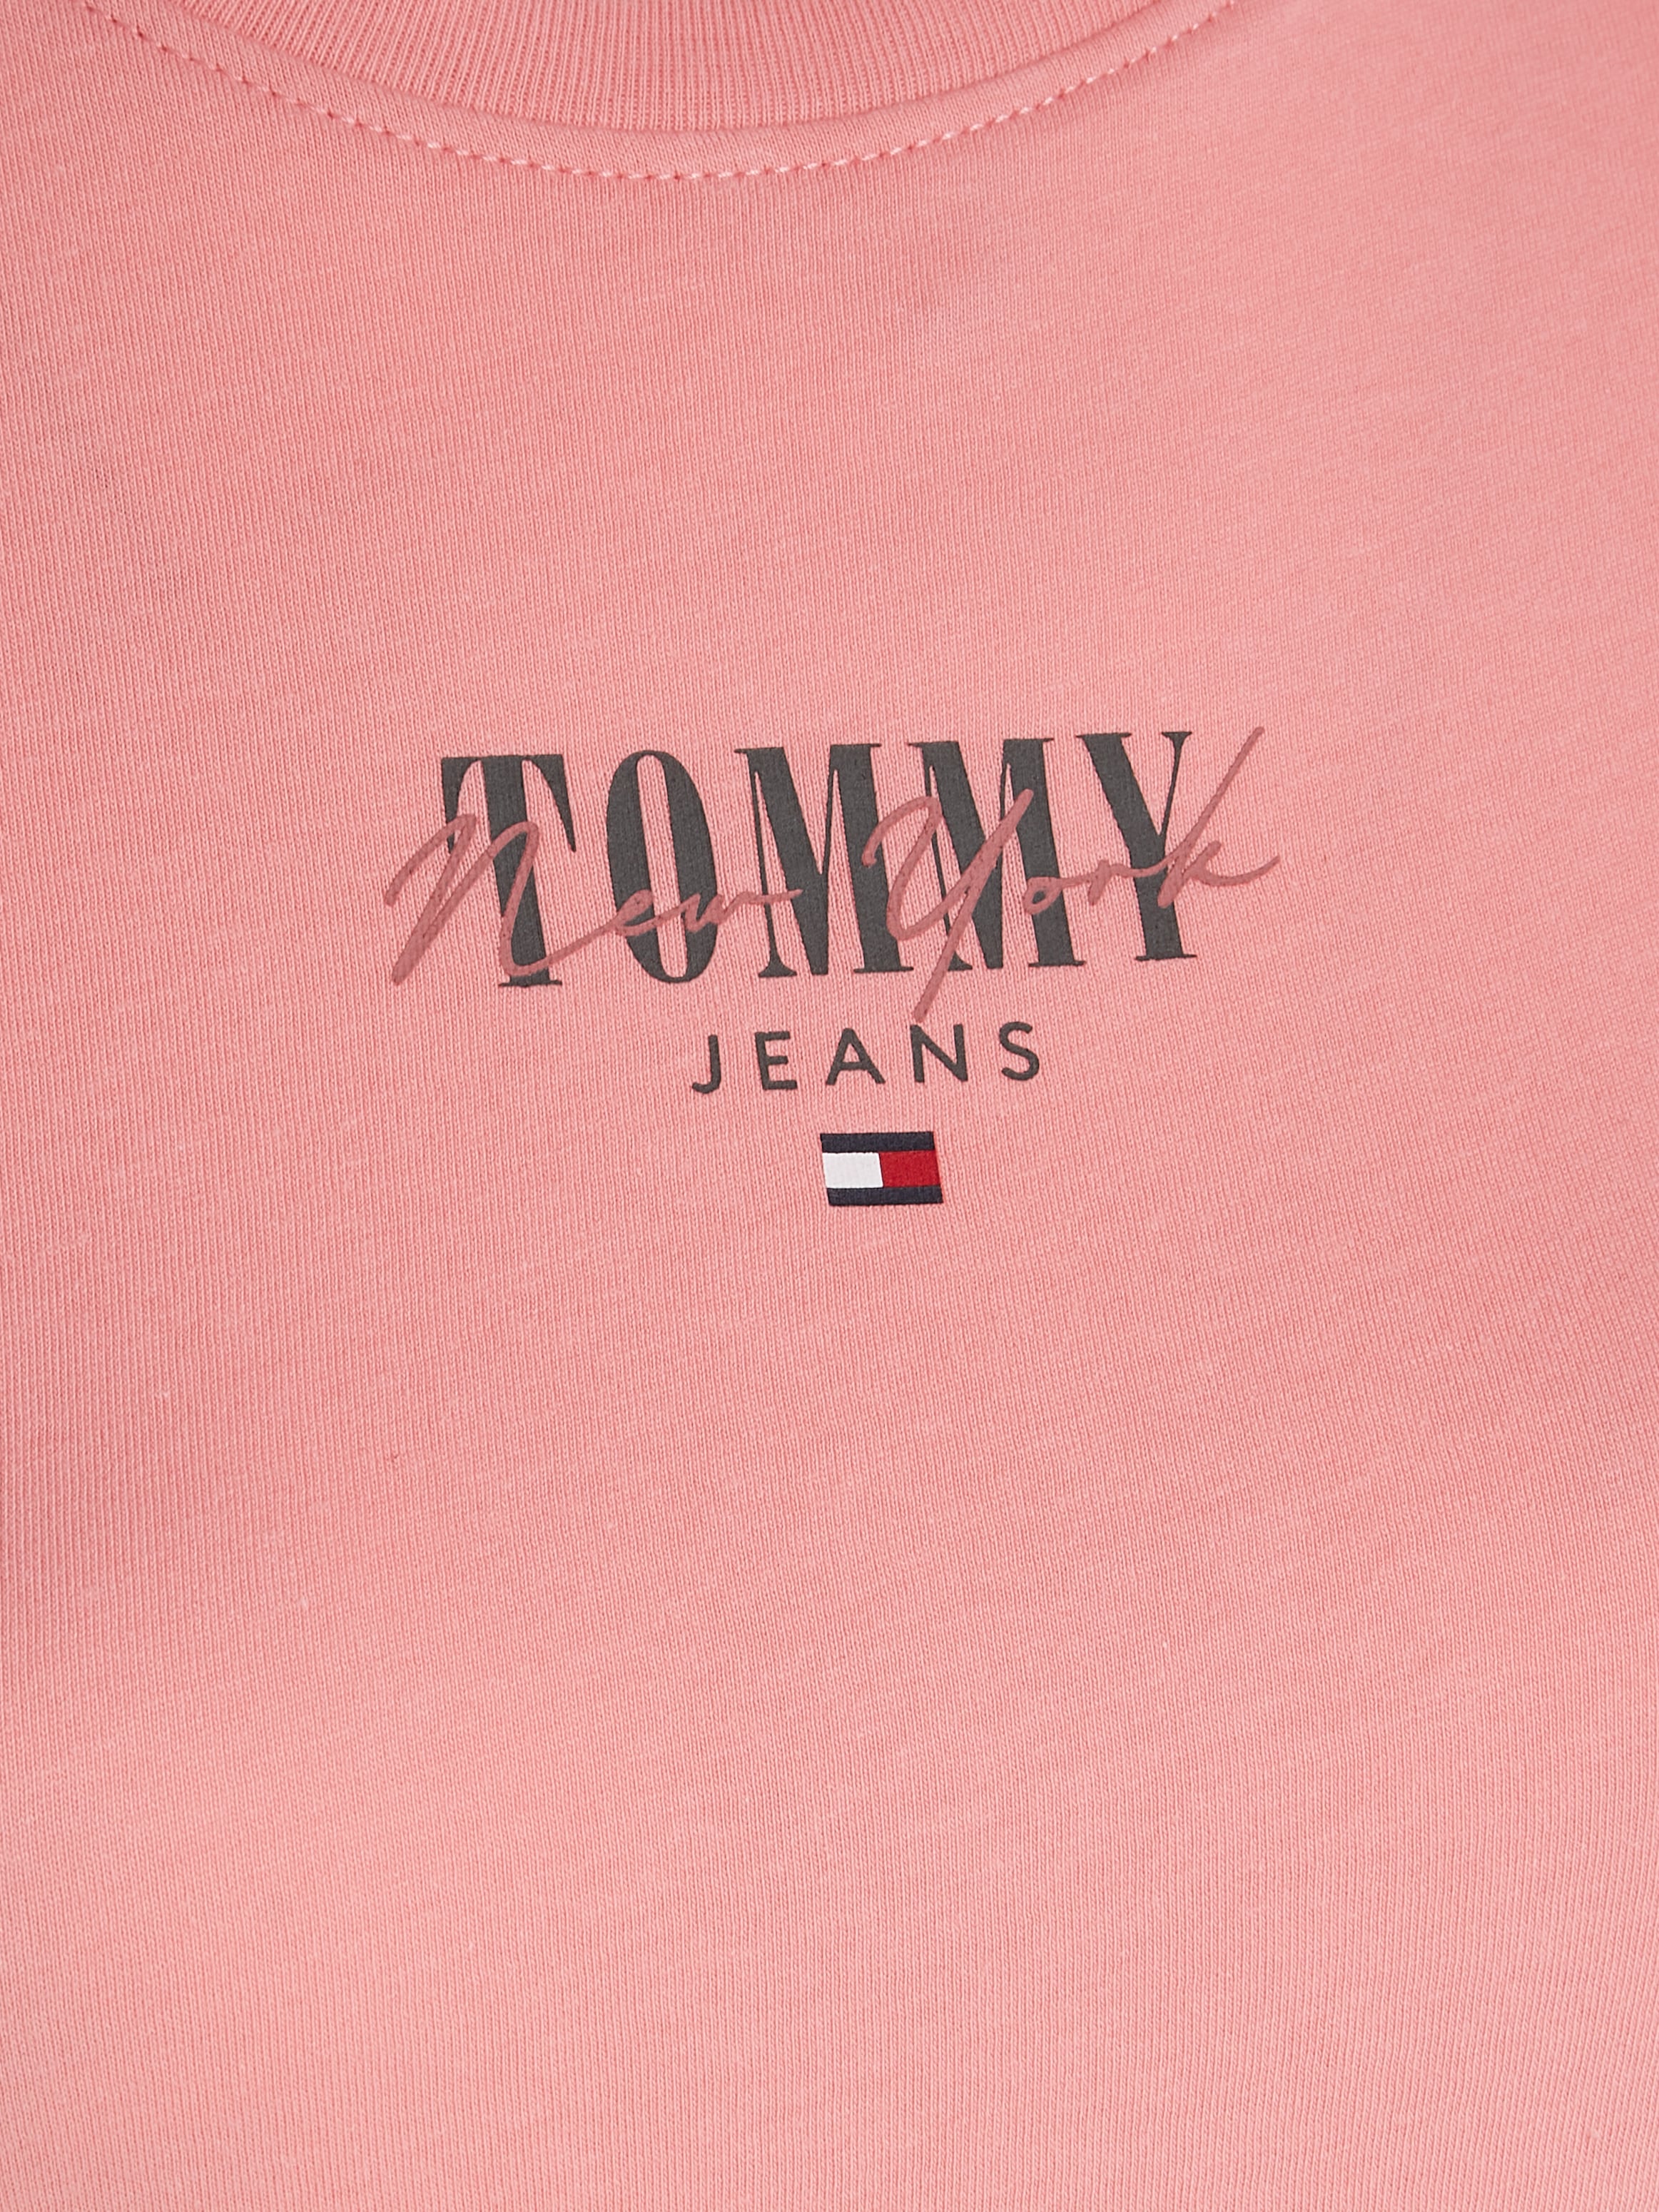 Tommy Jeans T-Shirt »TJW 2 PACK SLIM ESSENTIAL LOGO 1«, mit Tommy Jeans Flagge